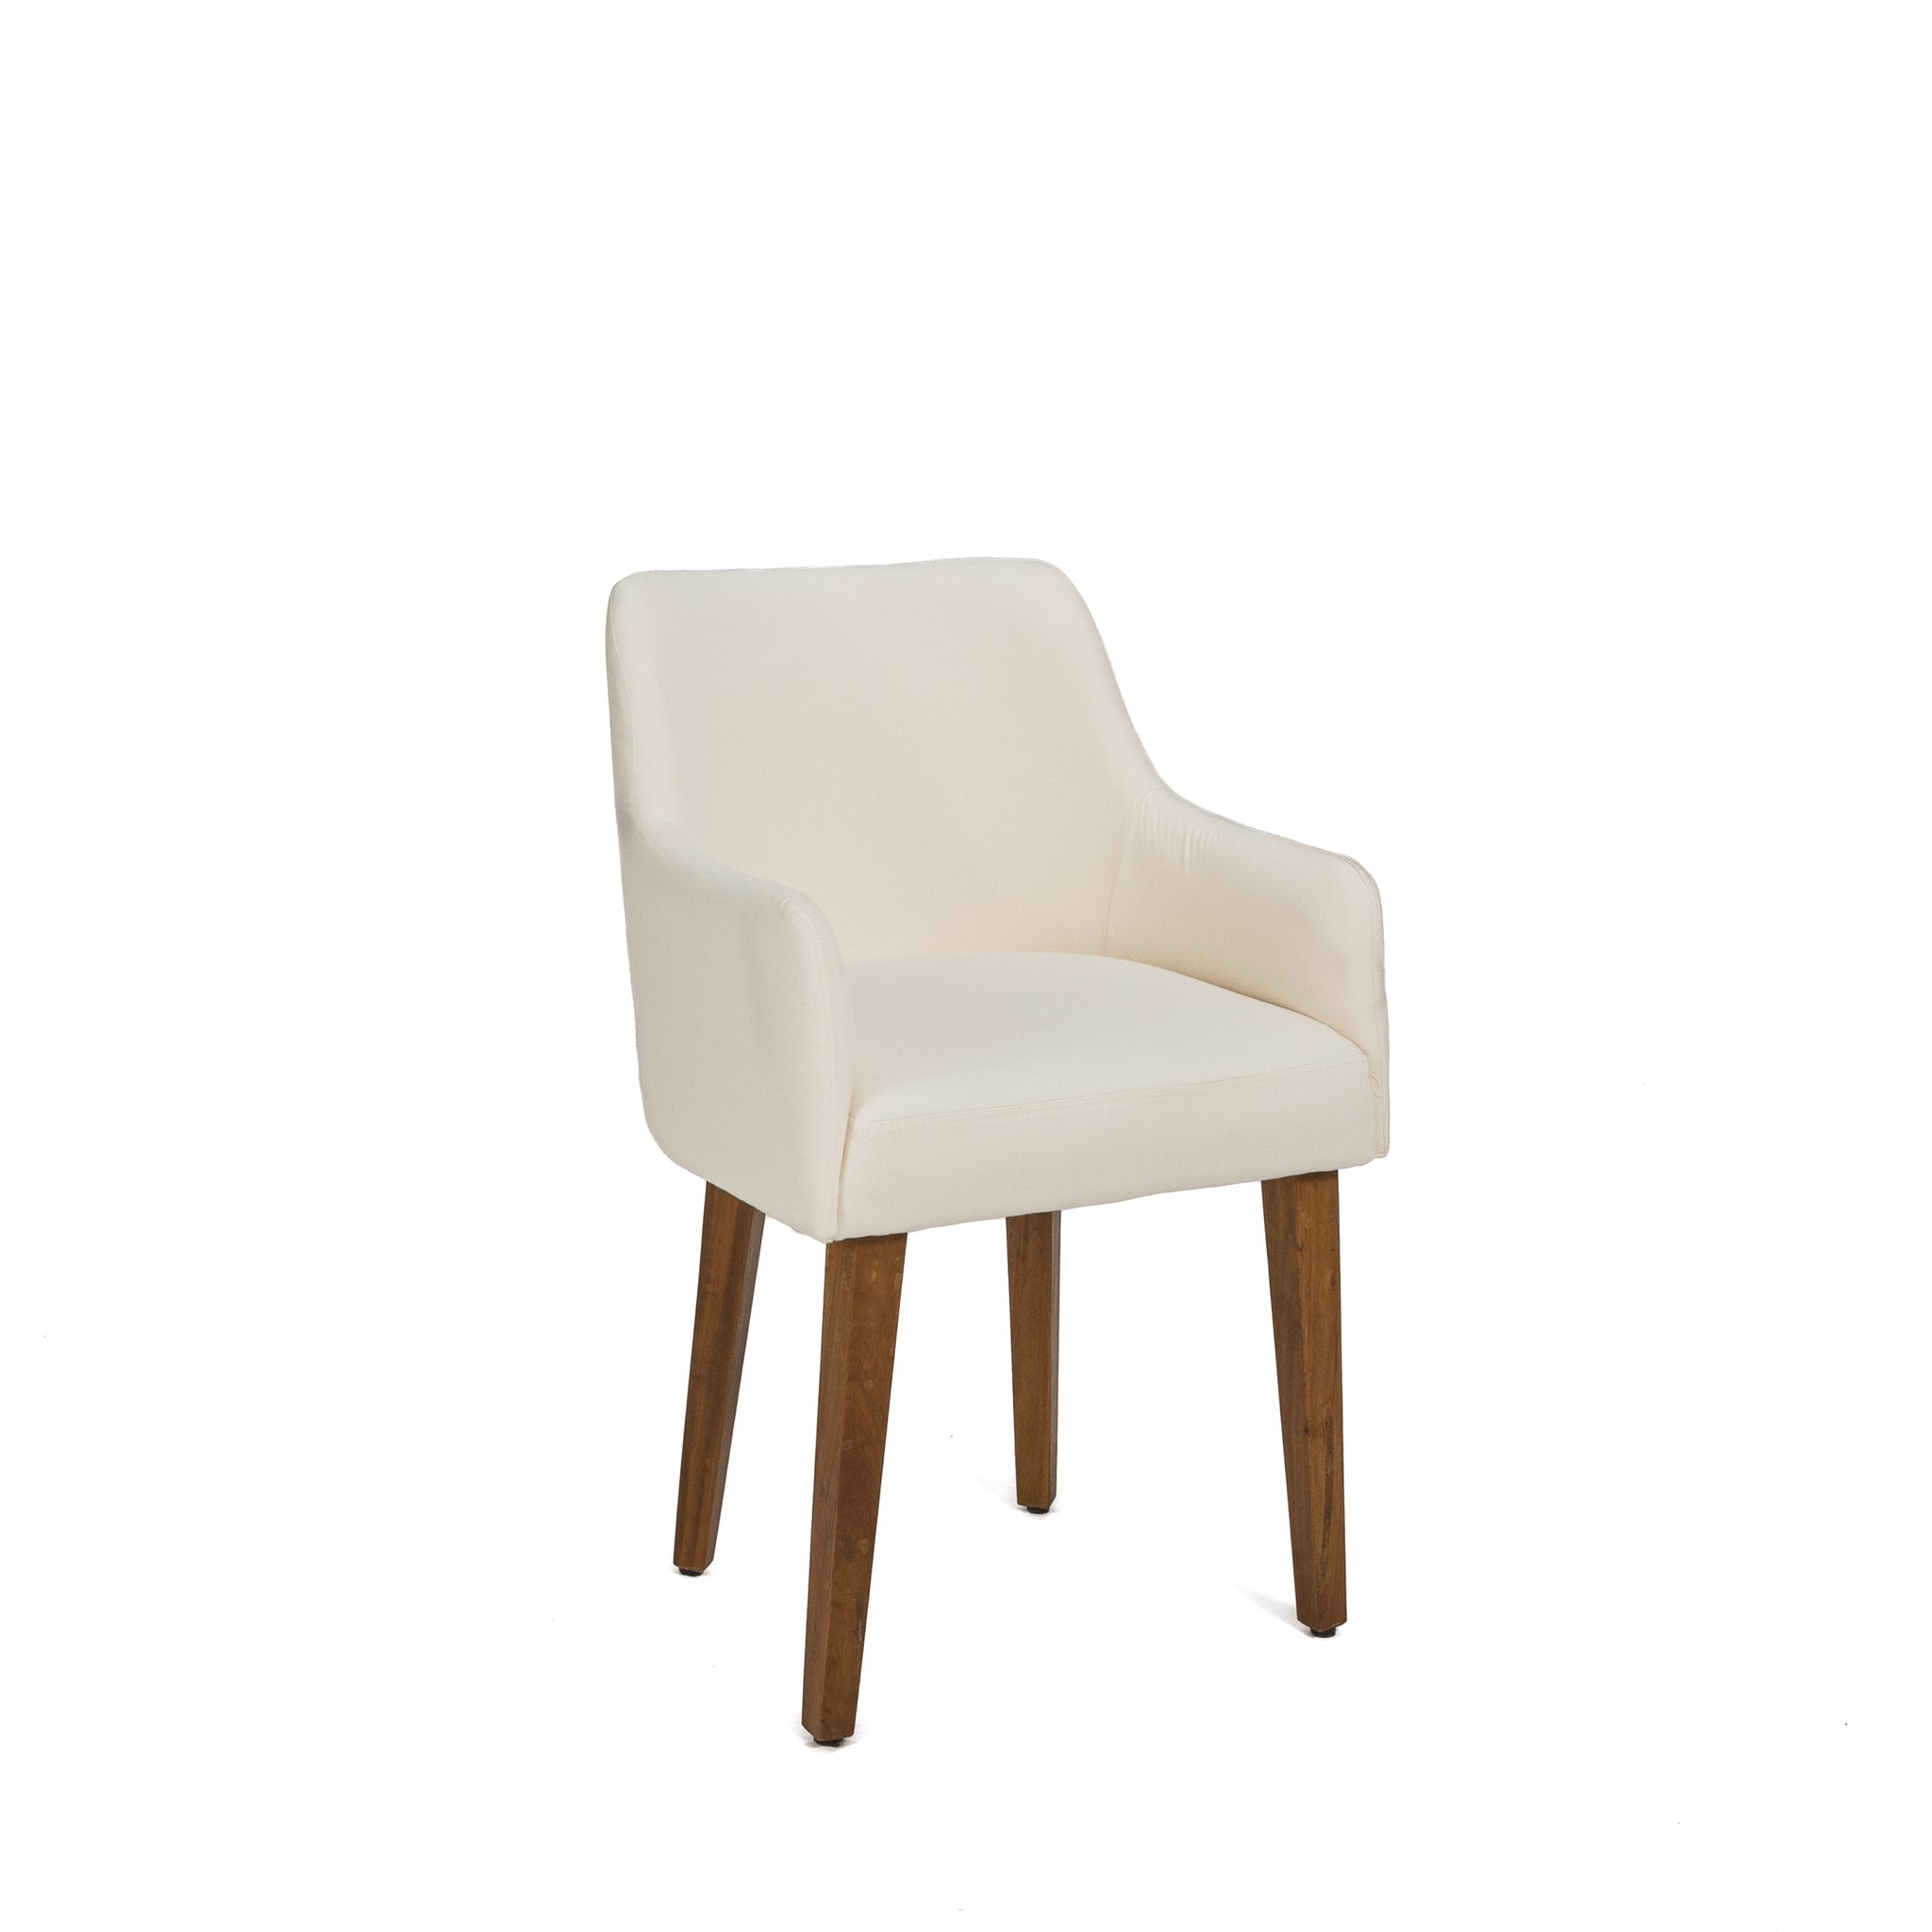 LEONARDO CHAIR - TWO IN ONE, UPHOLSTERED PLUS COVER